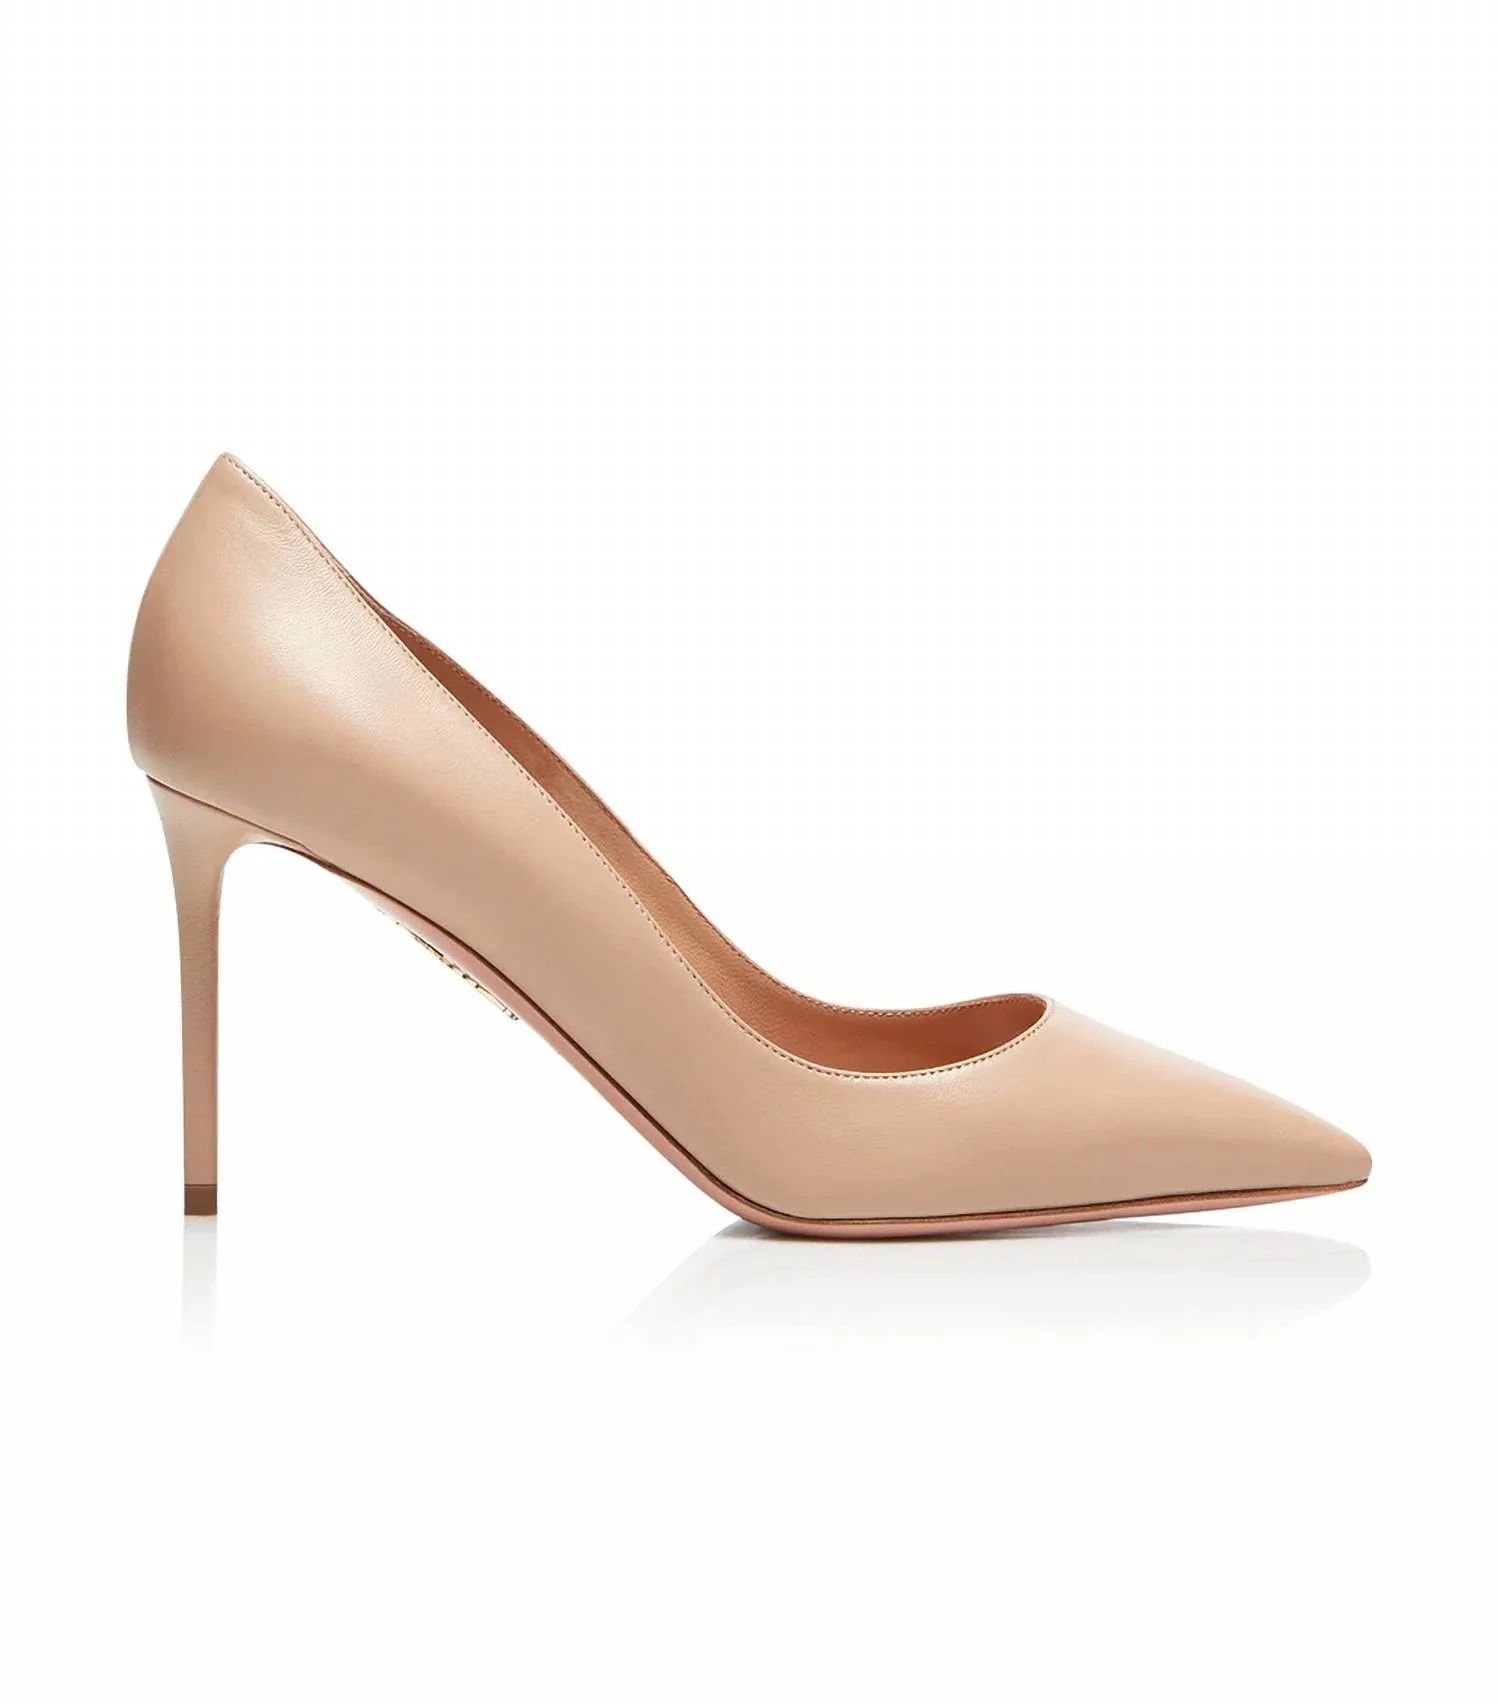 Purist Pump 85 In Nude | Shop Premium Outlets